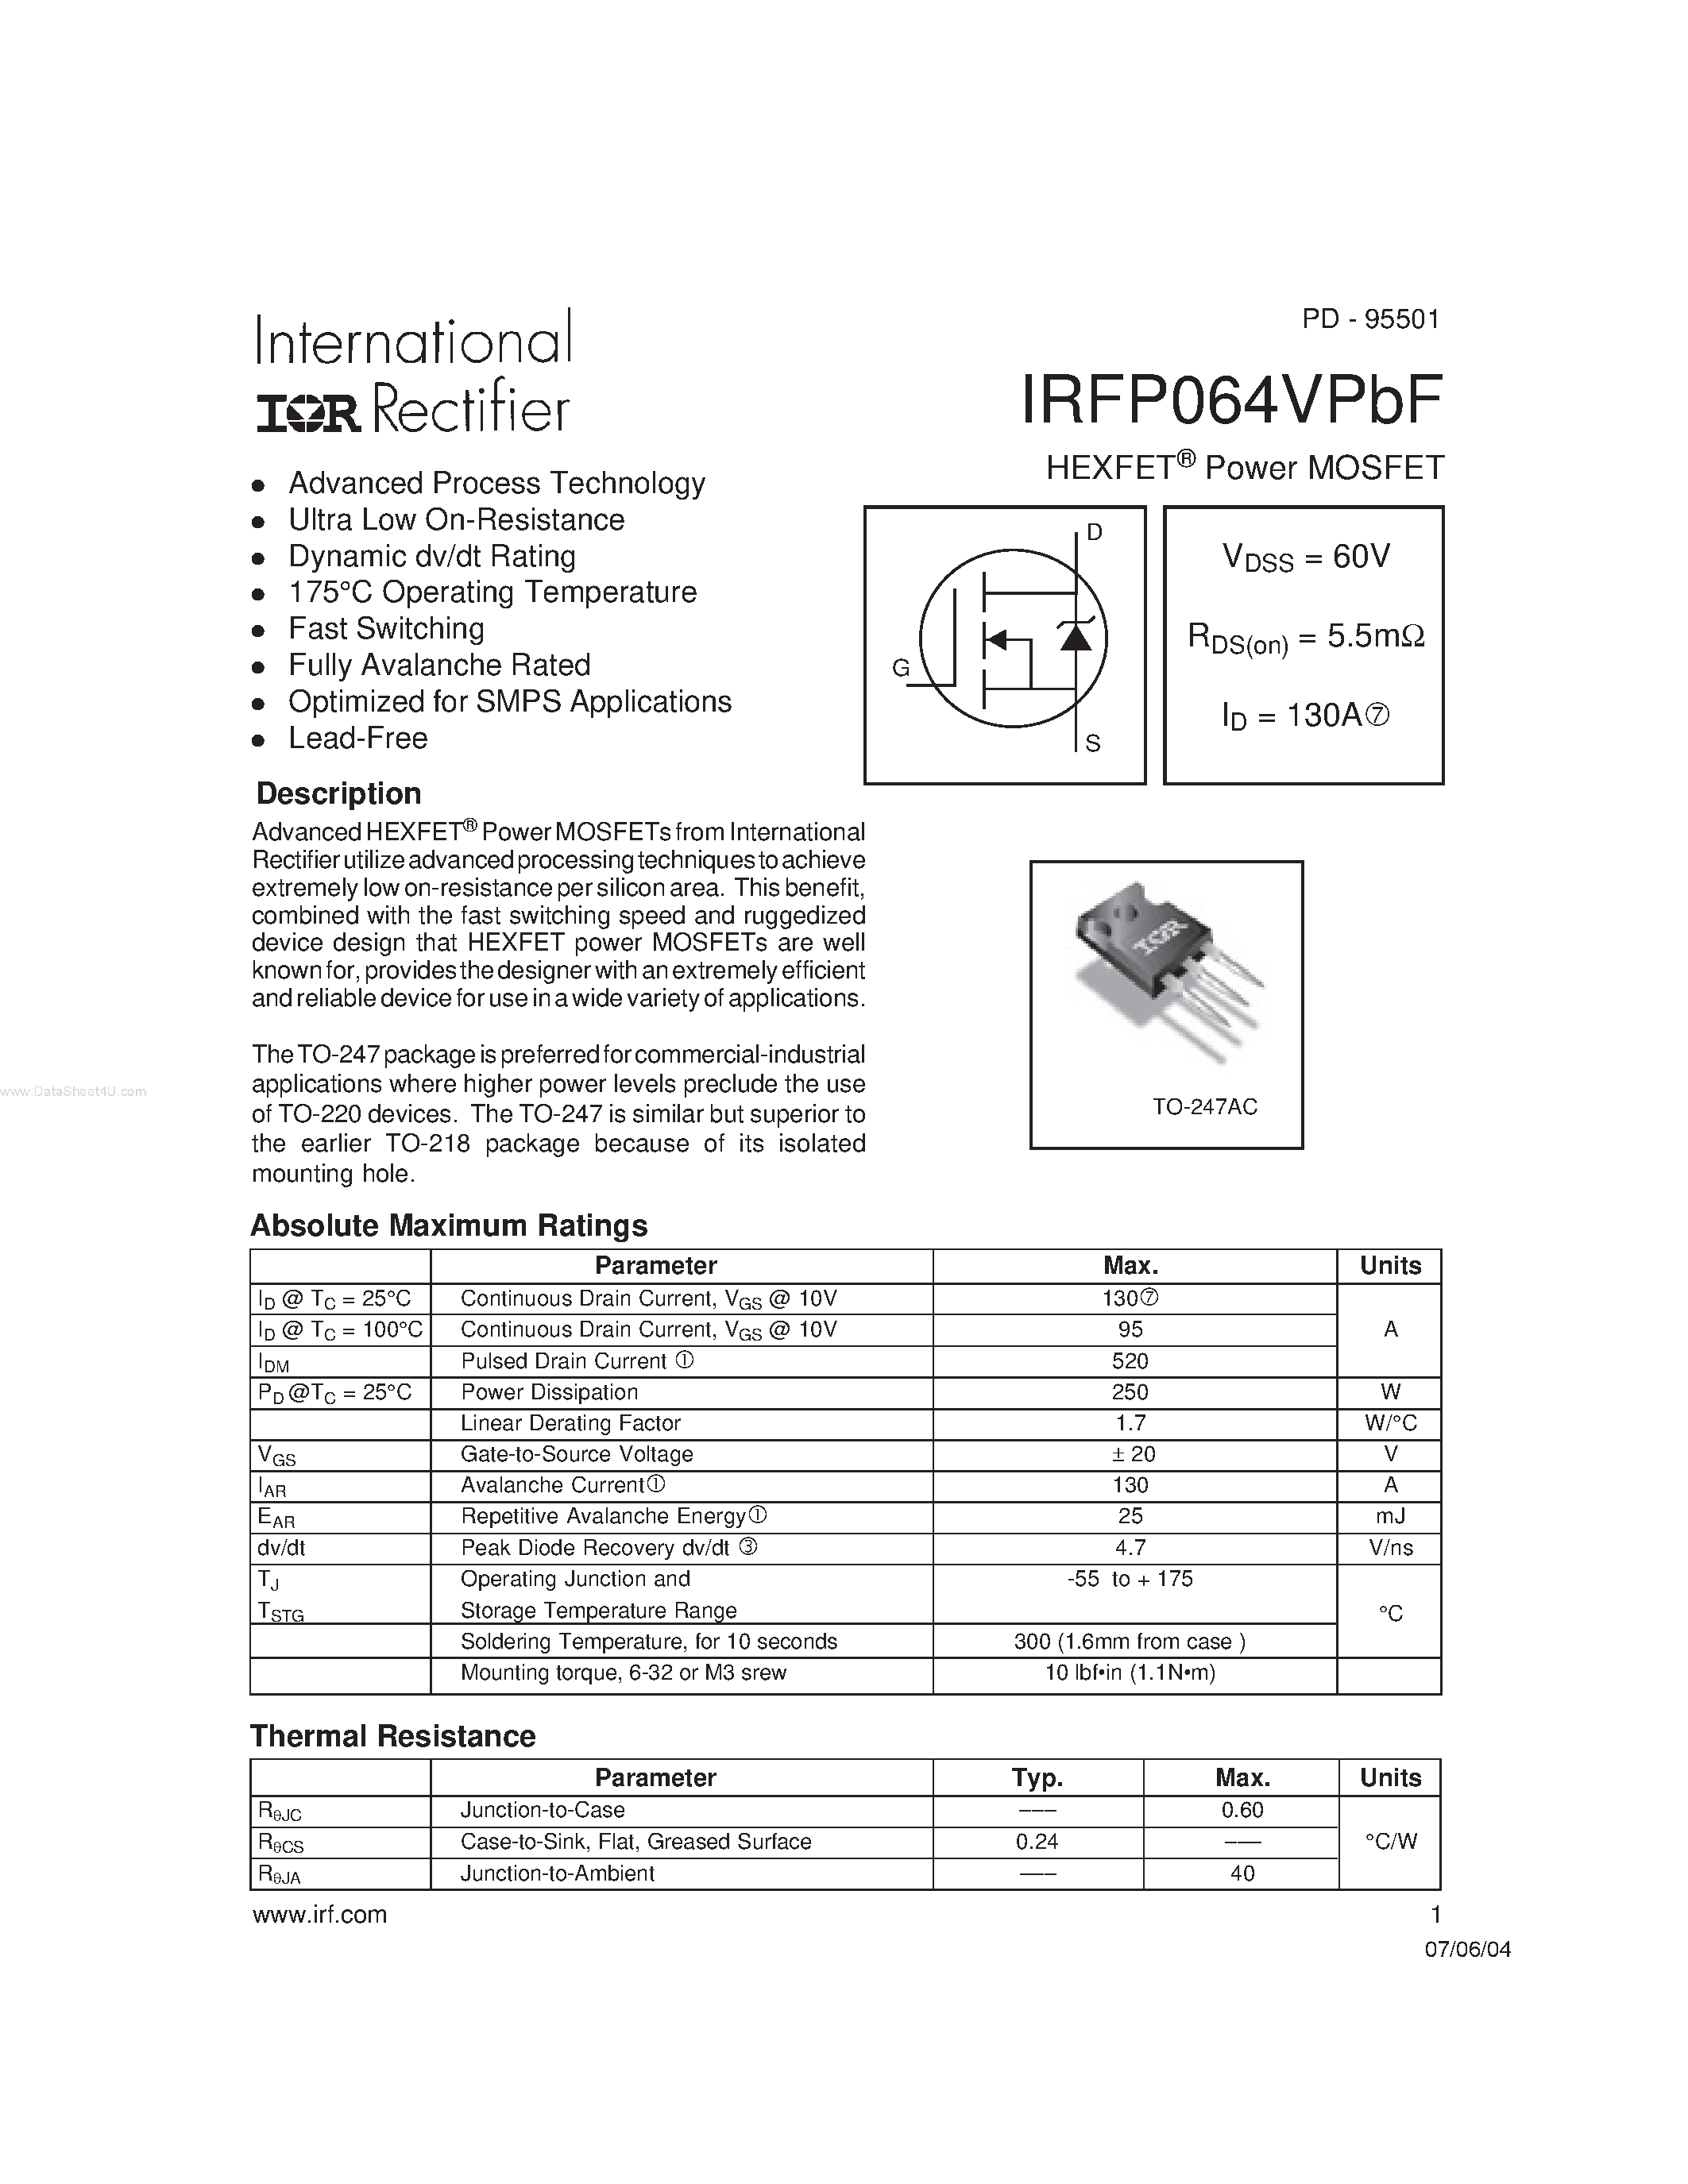 Даташит IRFP064VPBF - HEXFET Power MOSFET страница 1